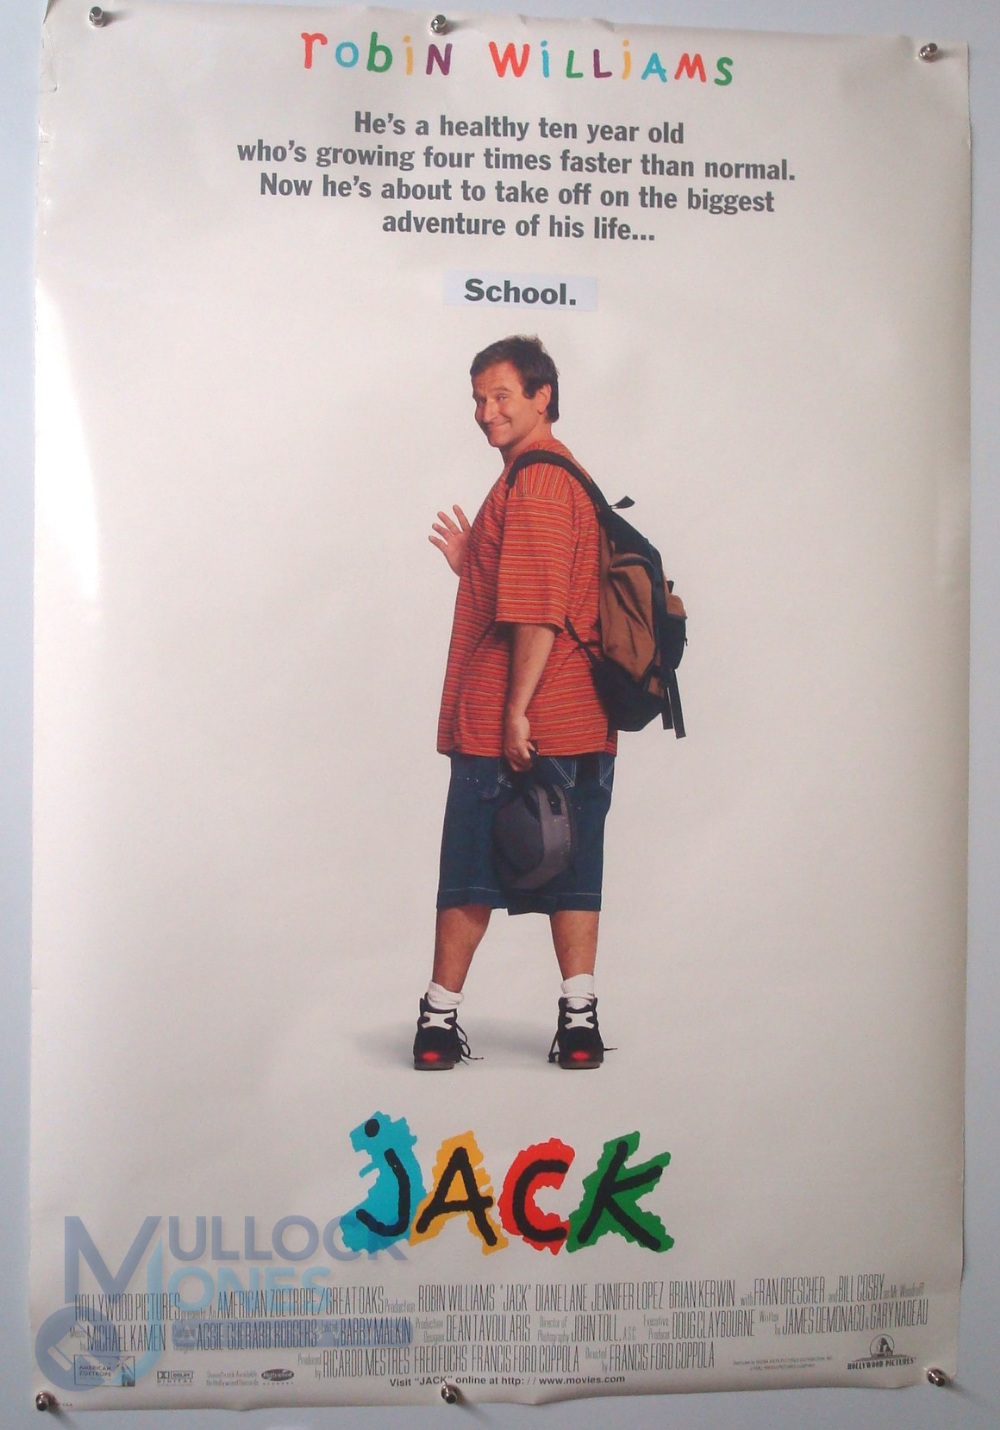 Original Movie/Film Poster - 1998 What Dreams May Come, 1996 Jack (with School Correction) - - Image 2 of 2